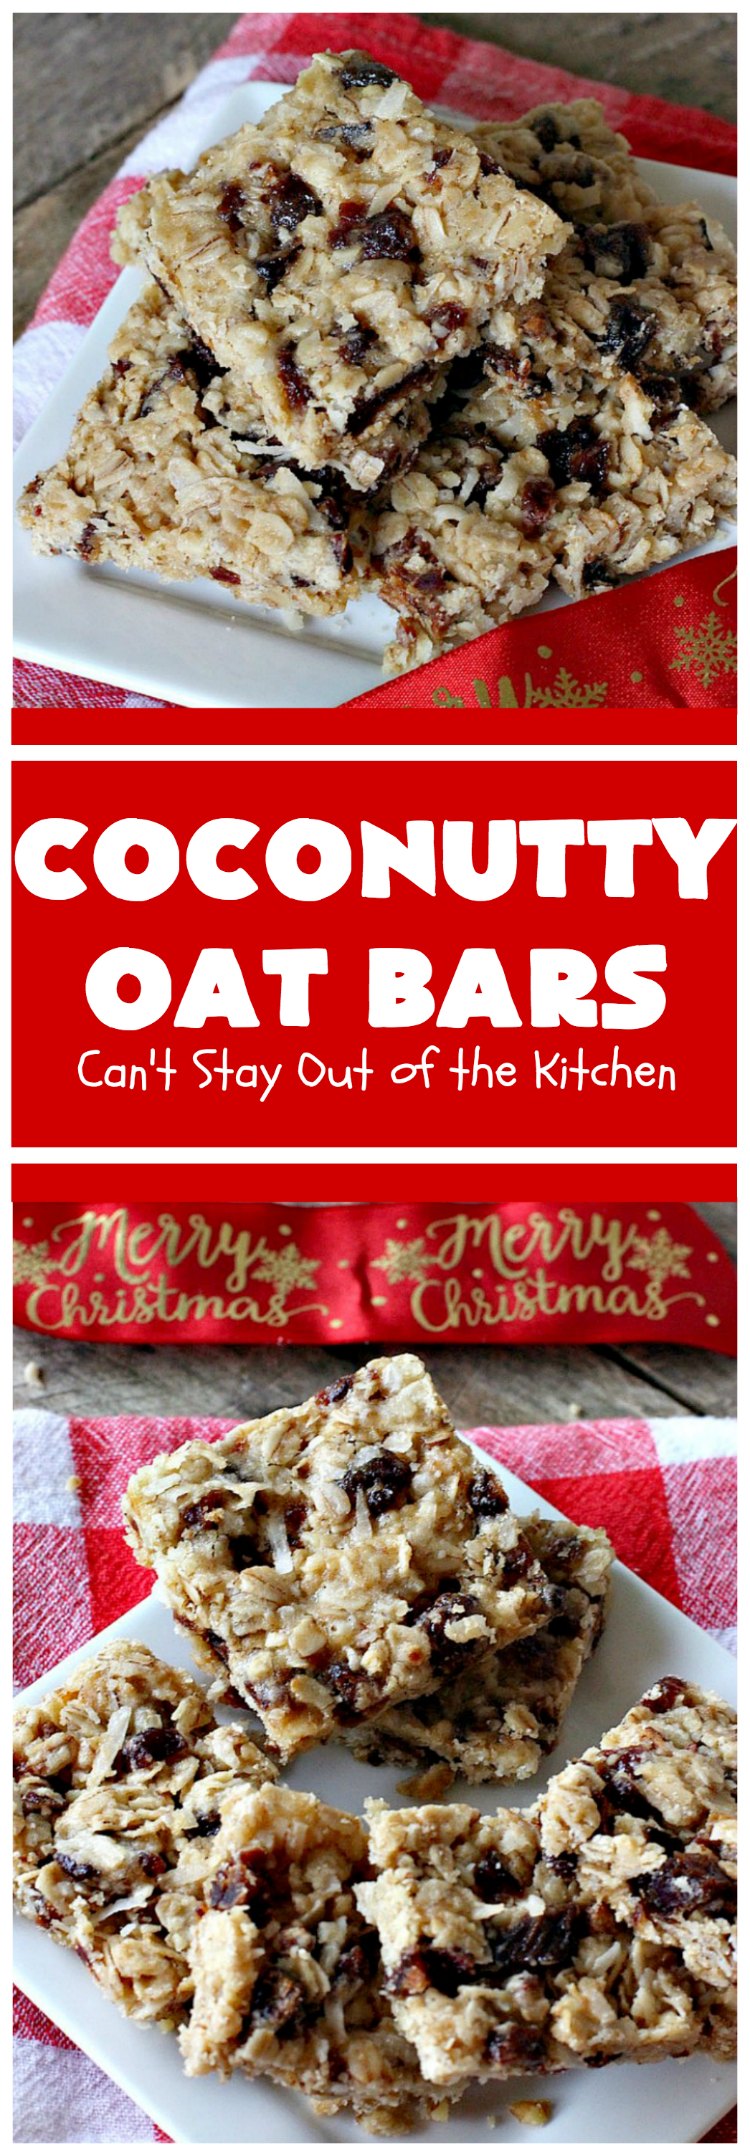 Coconutty Oat Bars | Can't Stay Out of the Kitchen | these heavenly bar-type #cookies are filled with #dates, #coconut, #oatmeal & #pecans. They're deliciously chewy & wonderful for #holiday or #tailgating parties. #dessert #CoconutDessert #HolidayDessert #ChristmasCookieExchange 